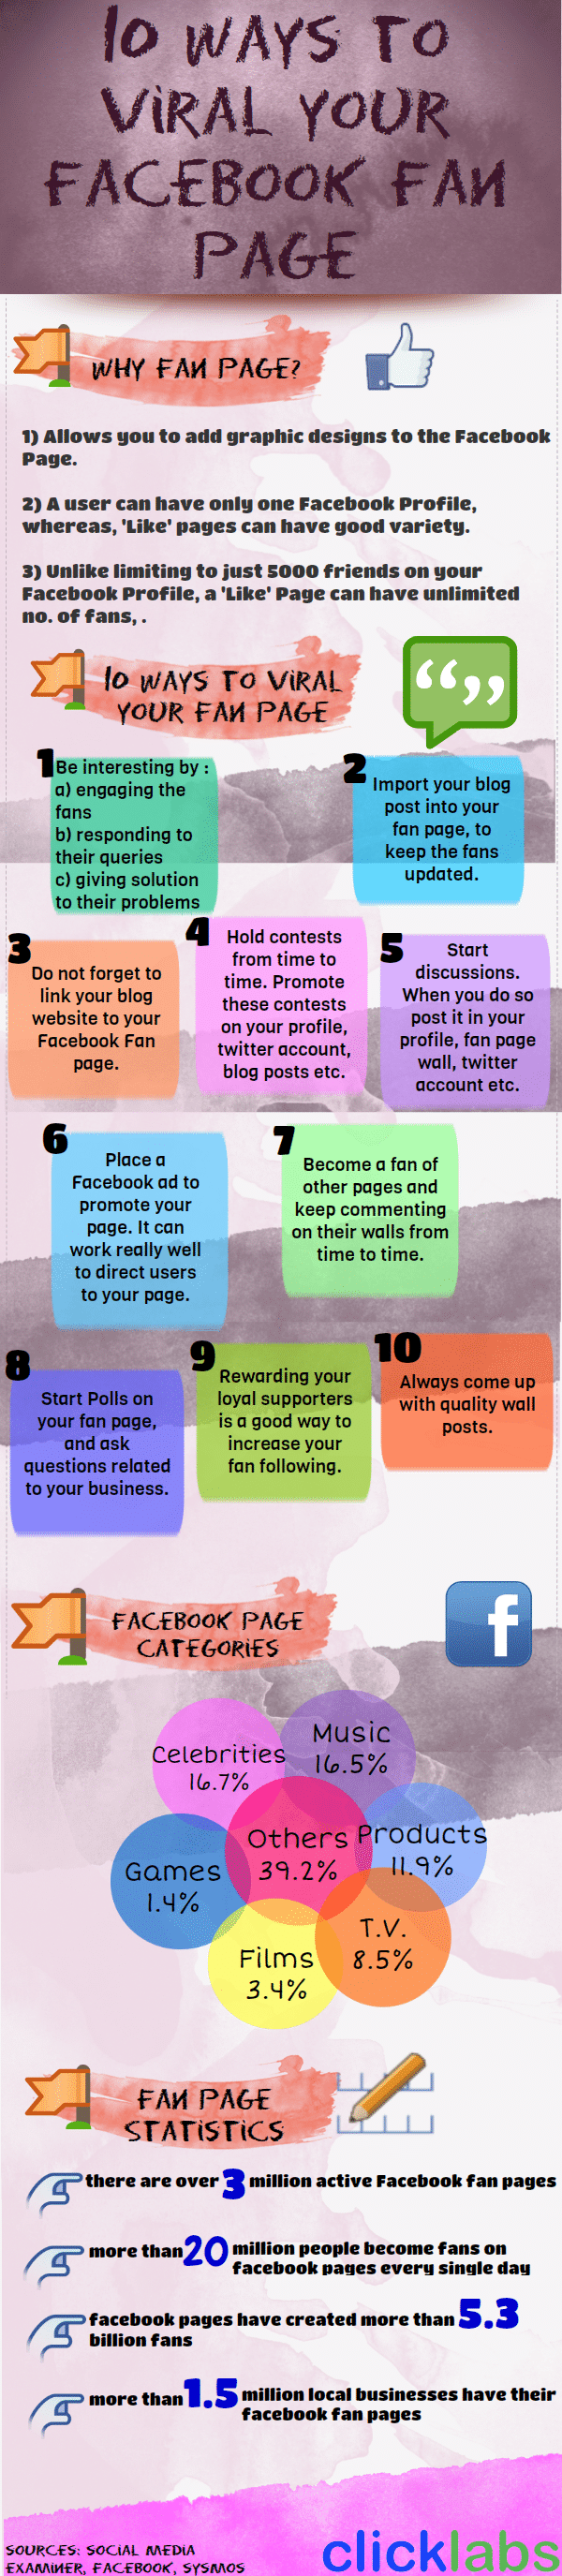 viral-your-facebook-page-infographic